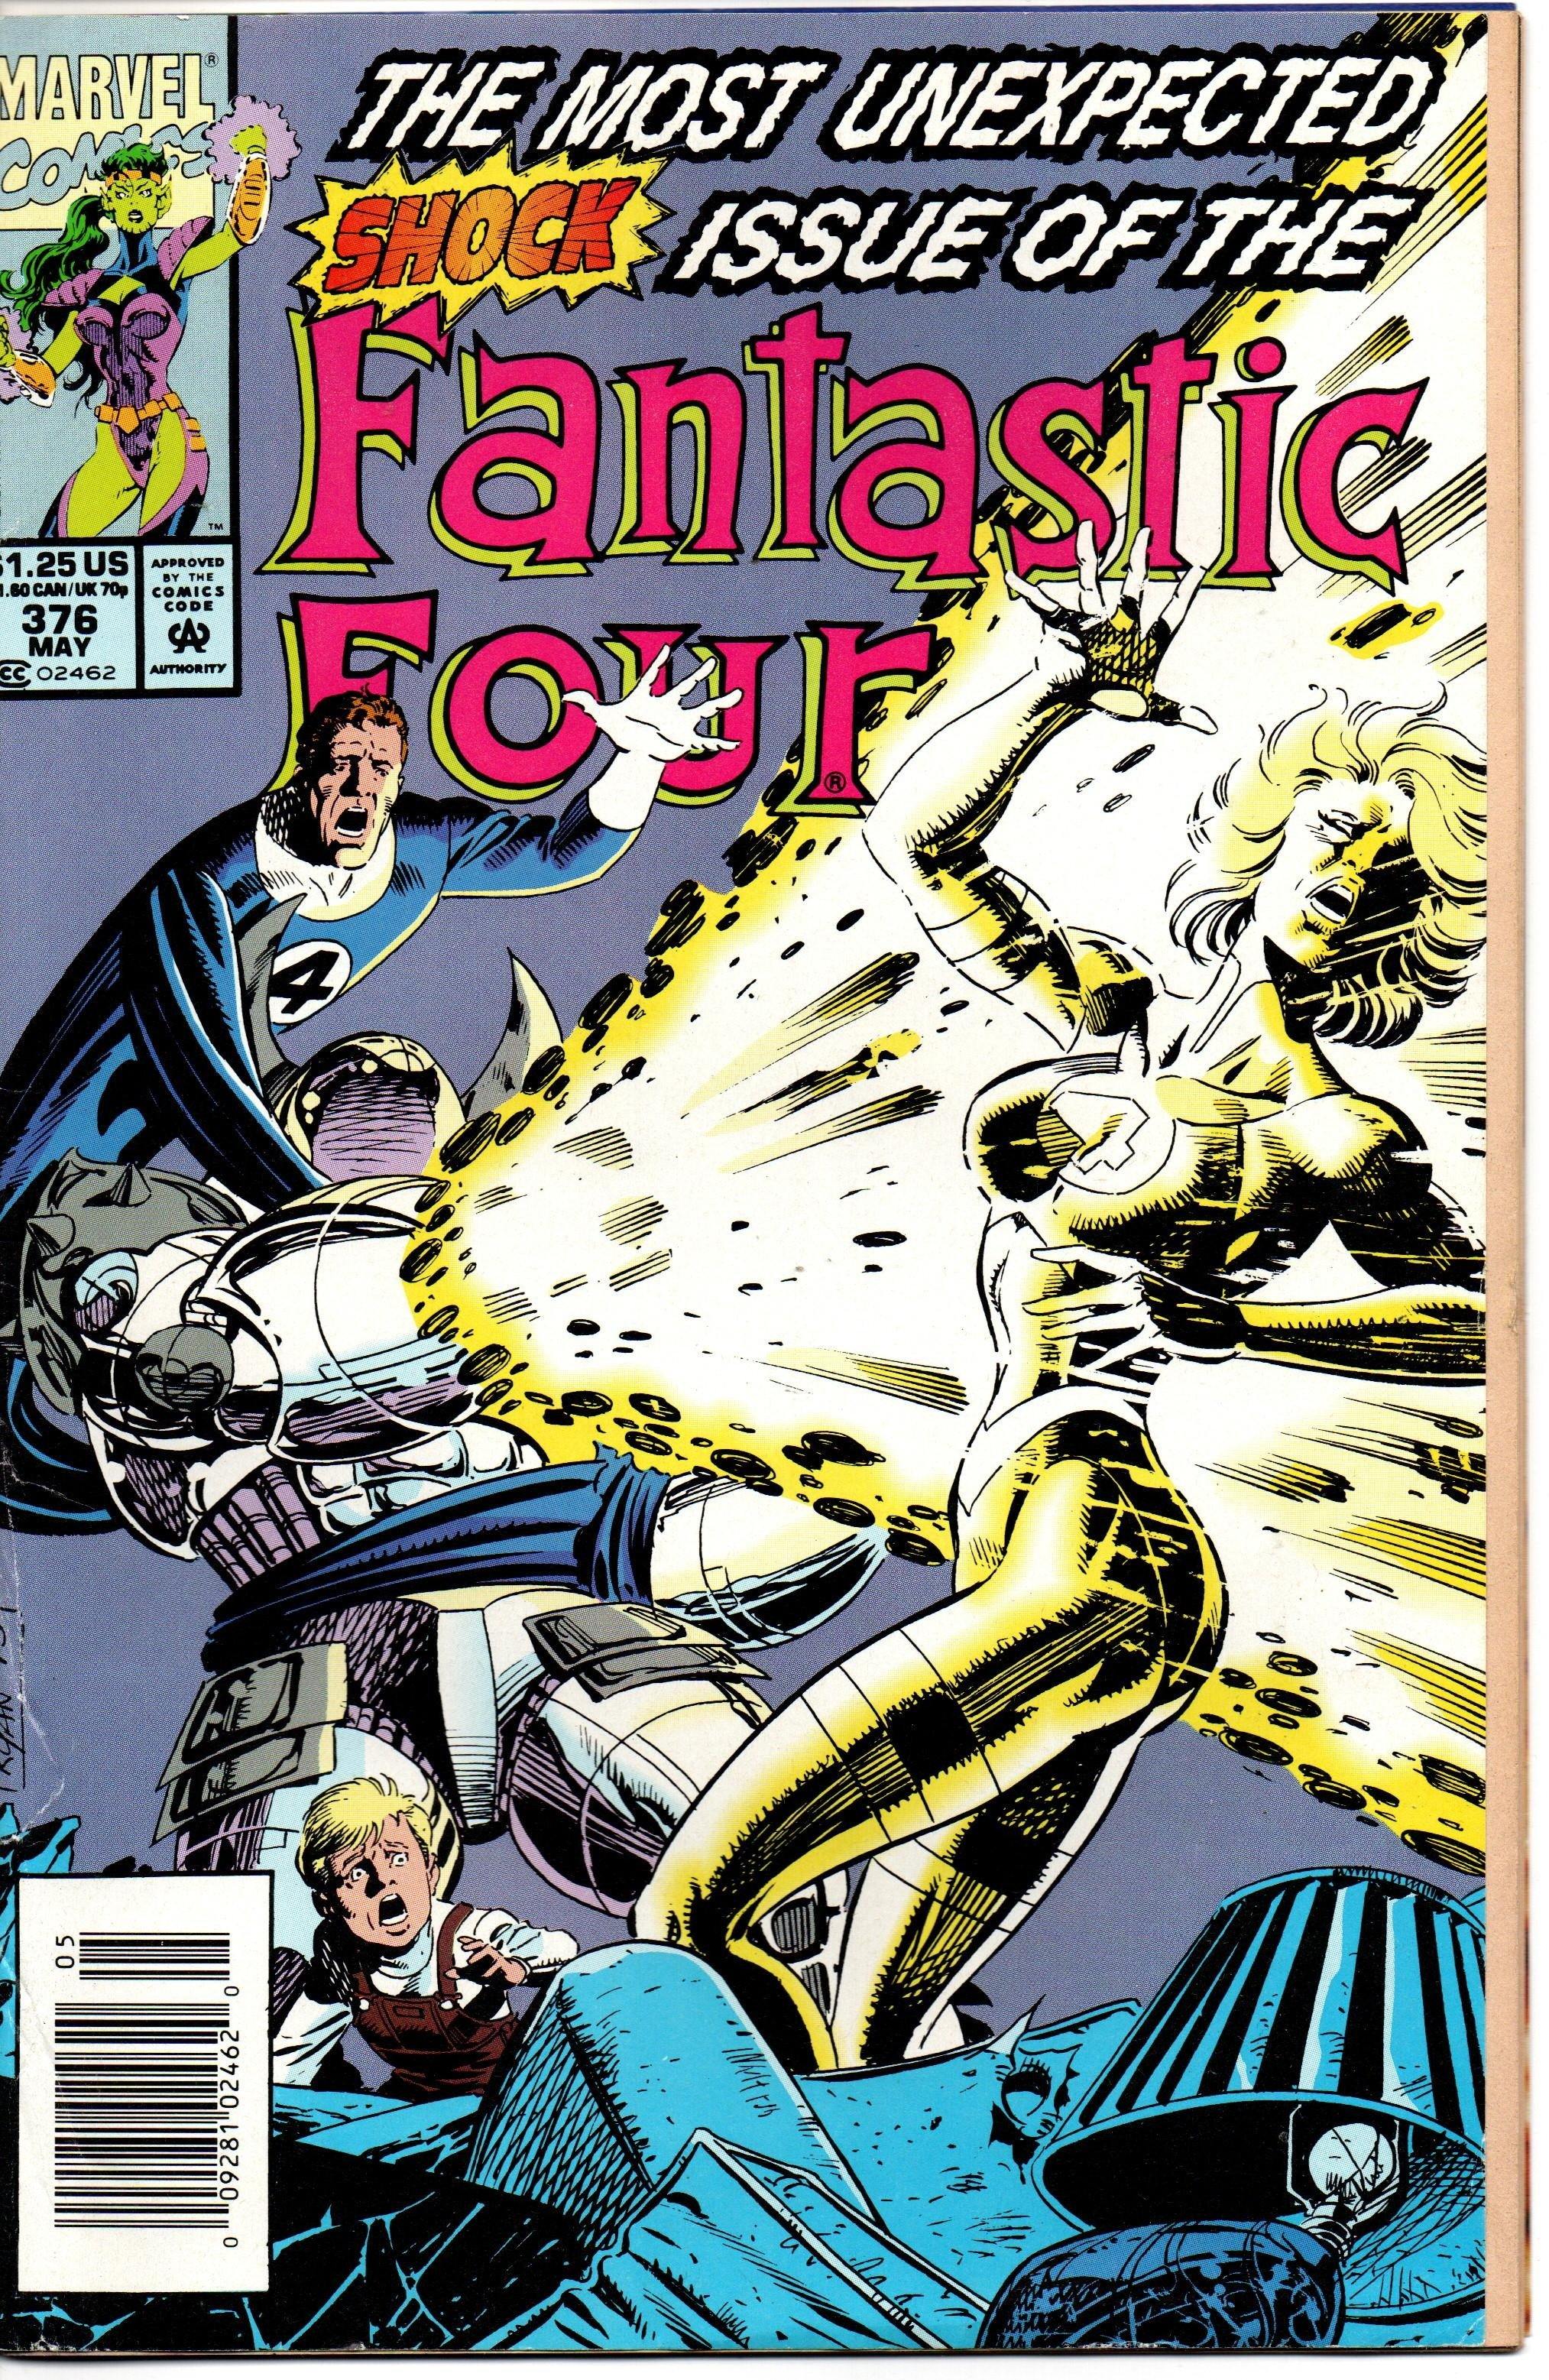 FANTASTIC FOUR #376 (1961 1st Series) MAY 376 [USED]